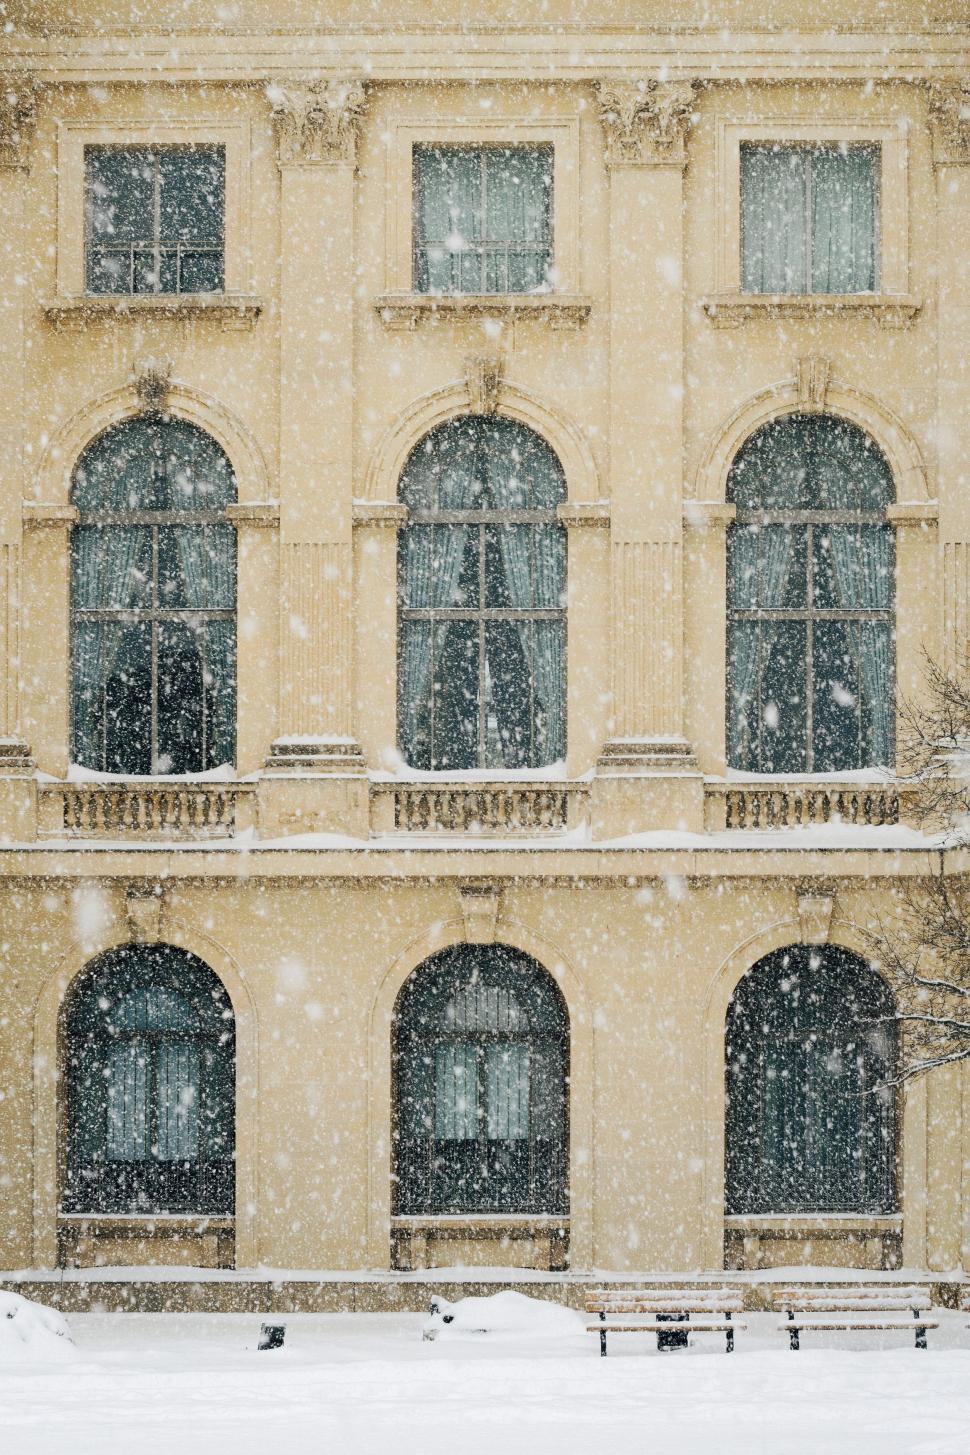 Free Image of Building With Snow-Covered Windows 